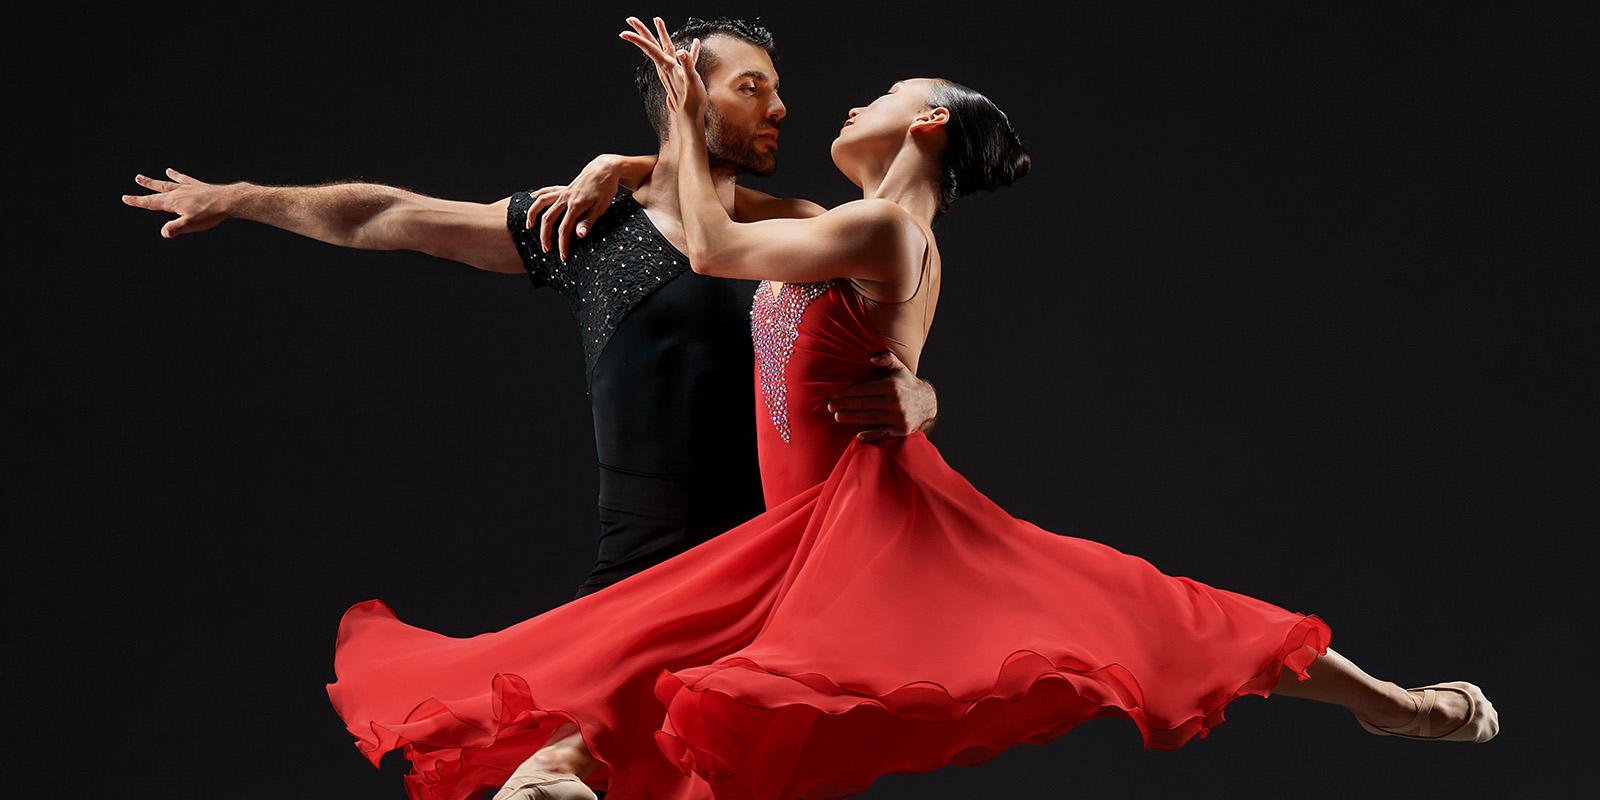 A man in black and a woman in a red dress dance in front of dark background.